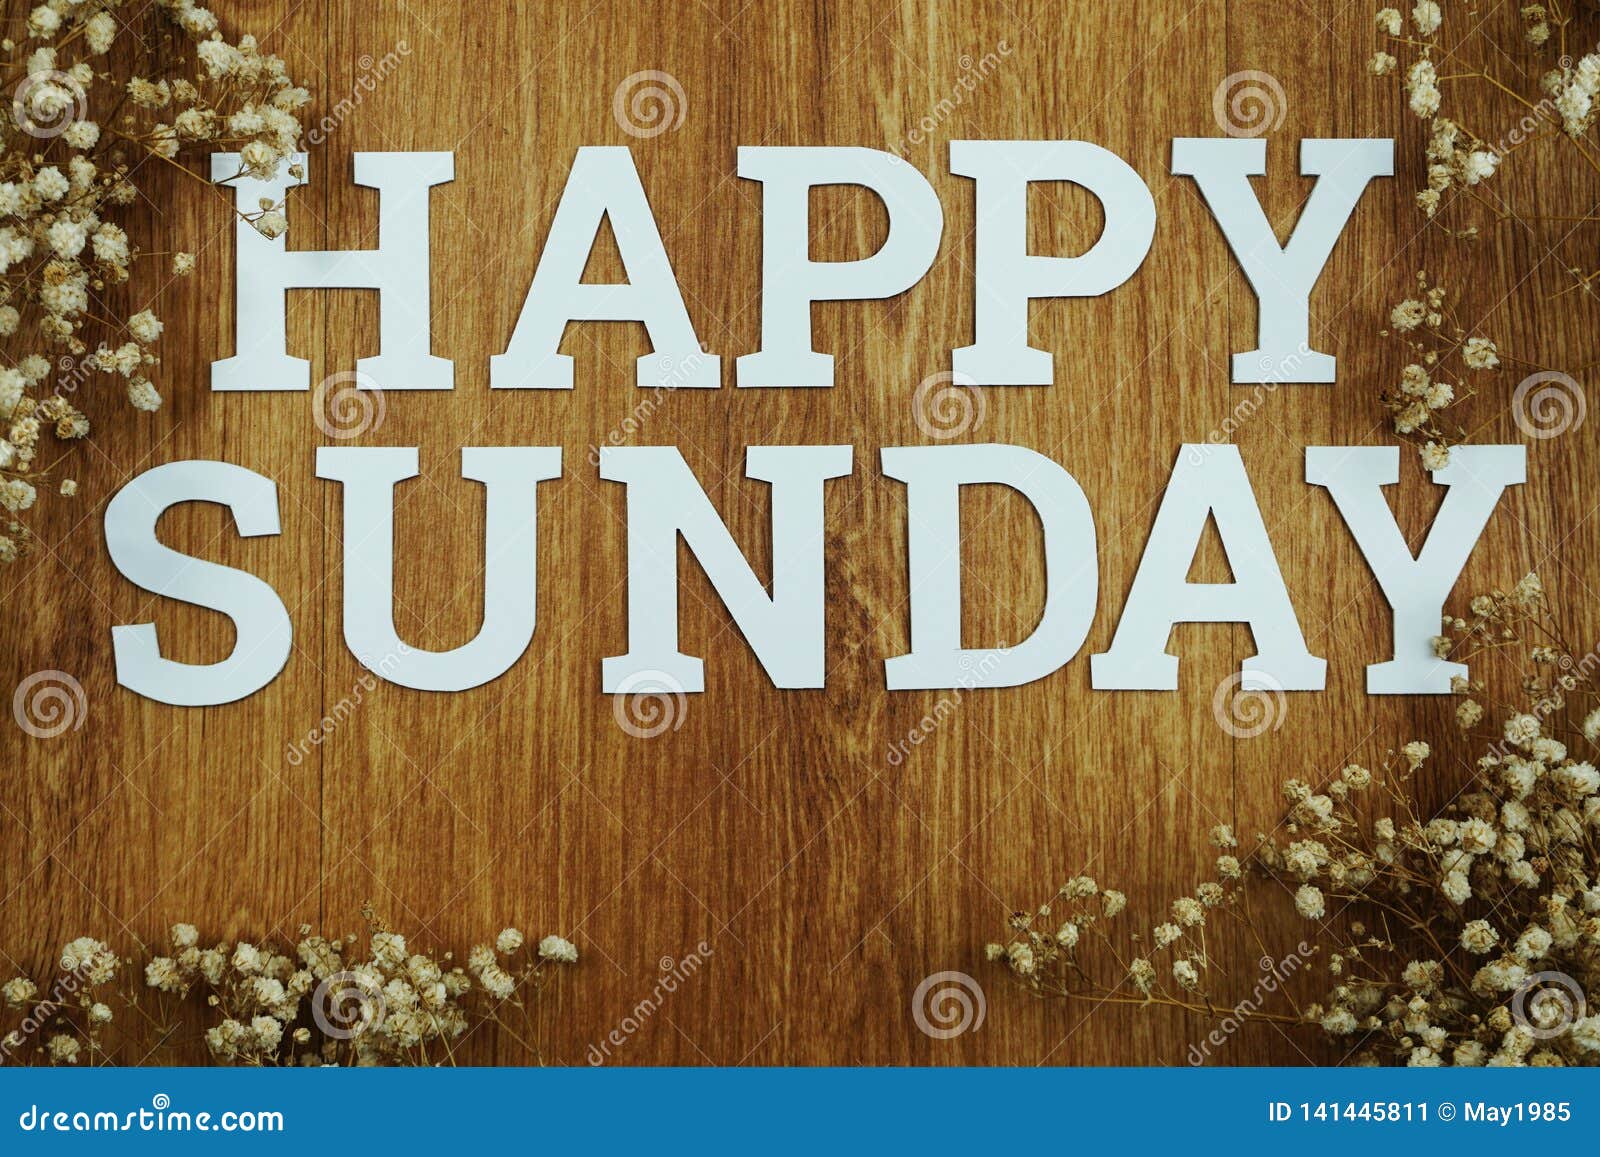 Happy Sunday Alphabet Letters Top View on Wooden Background Stock ...